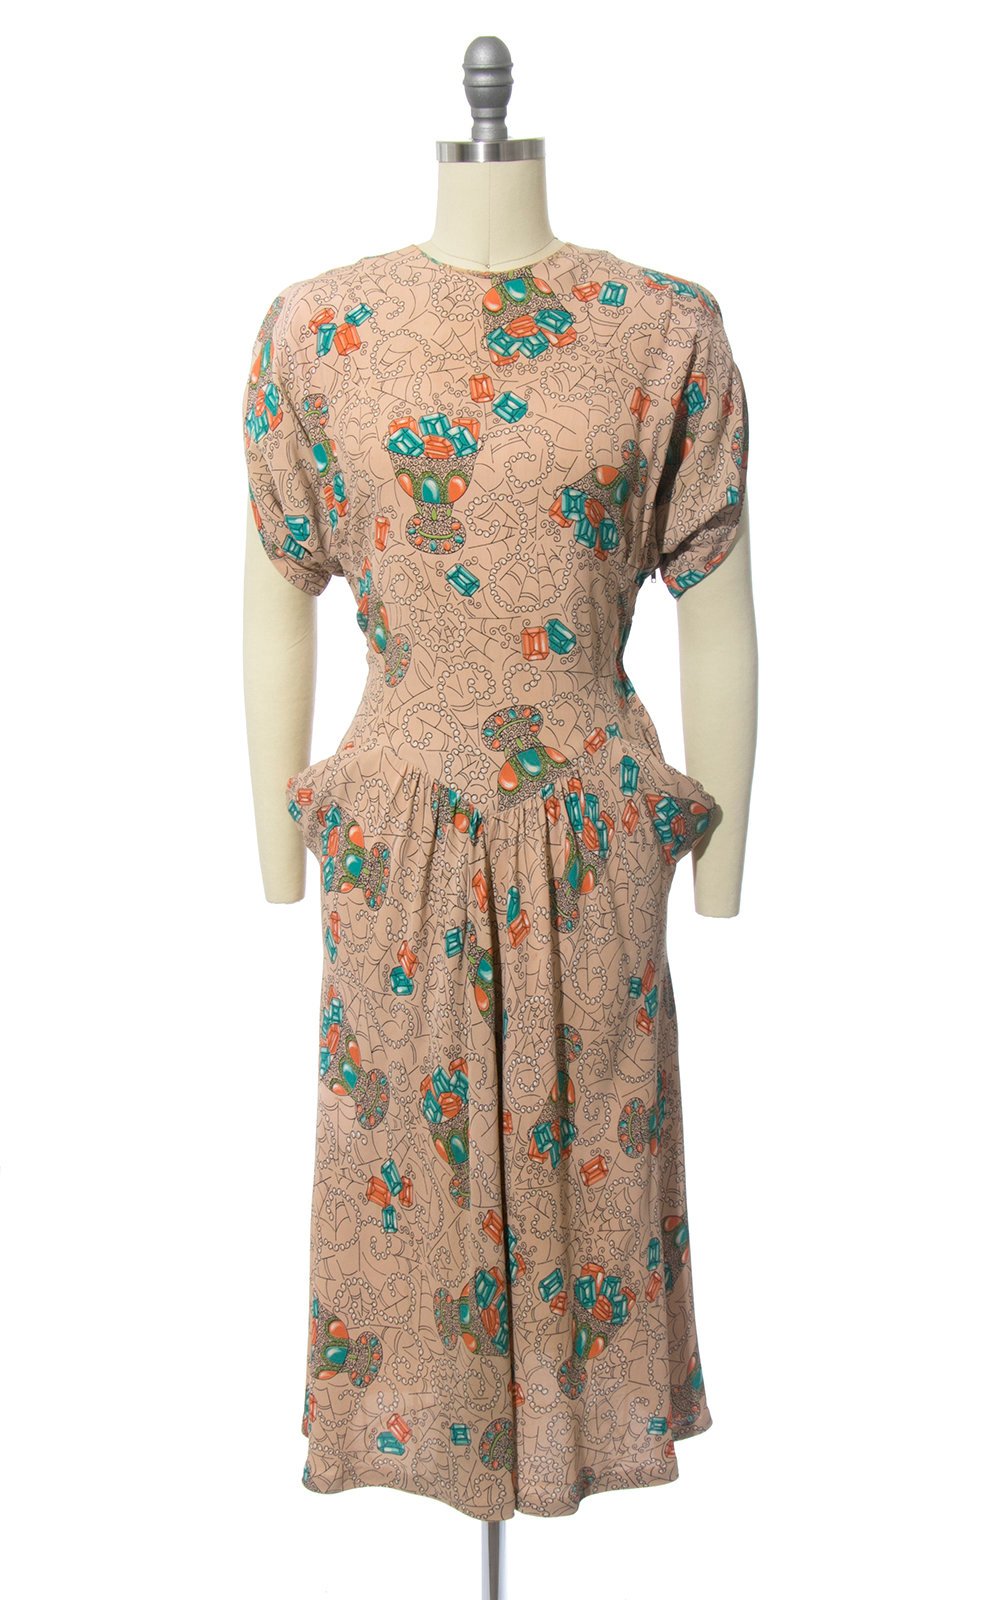 RARE Vintage 1940s Dress | 40s Spiderweb Gems Novelty Print Rayon Crepe Nude Cocktail Evening Dress w/ Pockets (small)